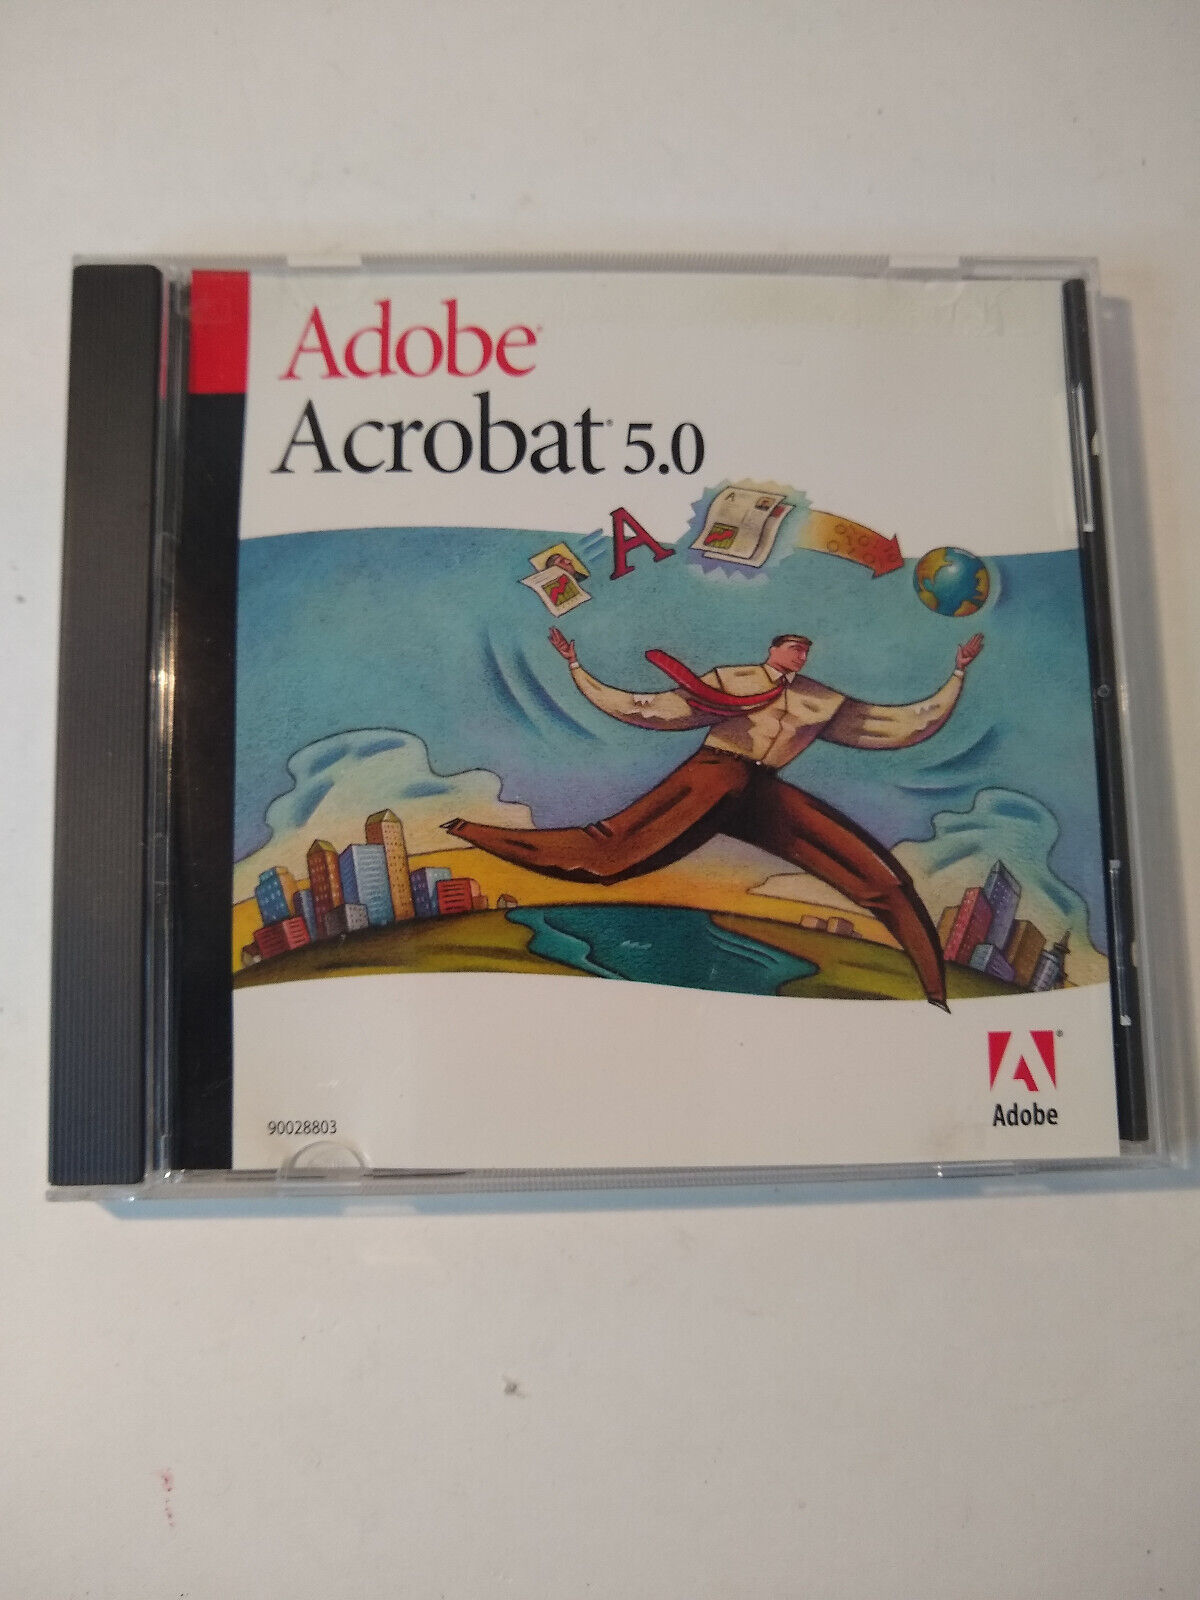 Adobe Acrobat 5.0 for Windows 90028803 for Windows with Serial Number